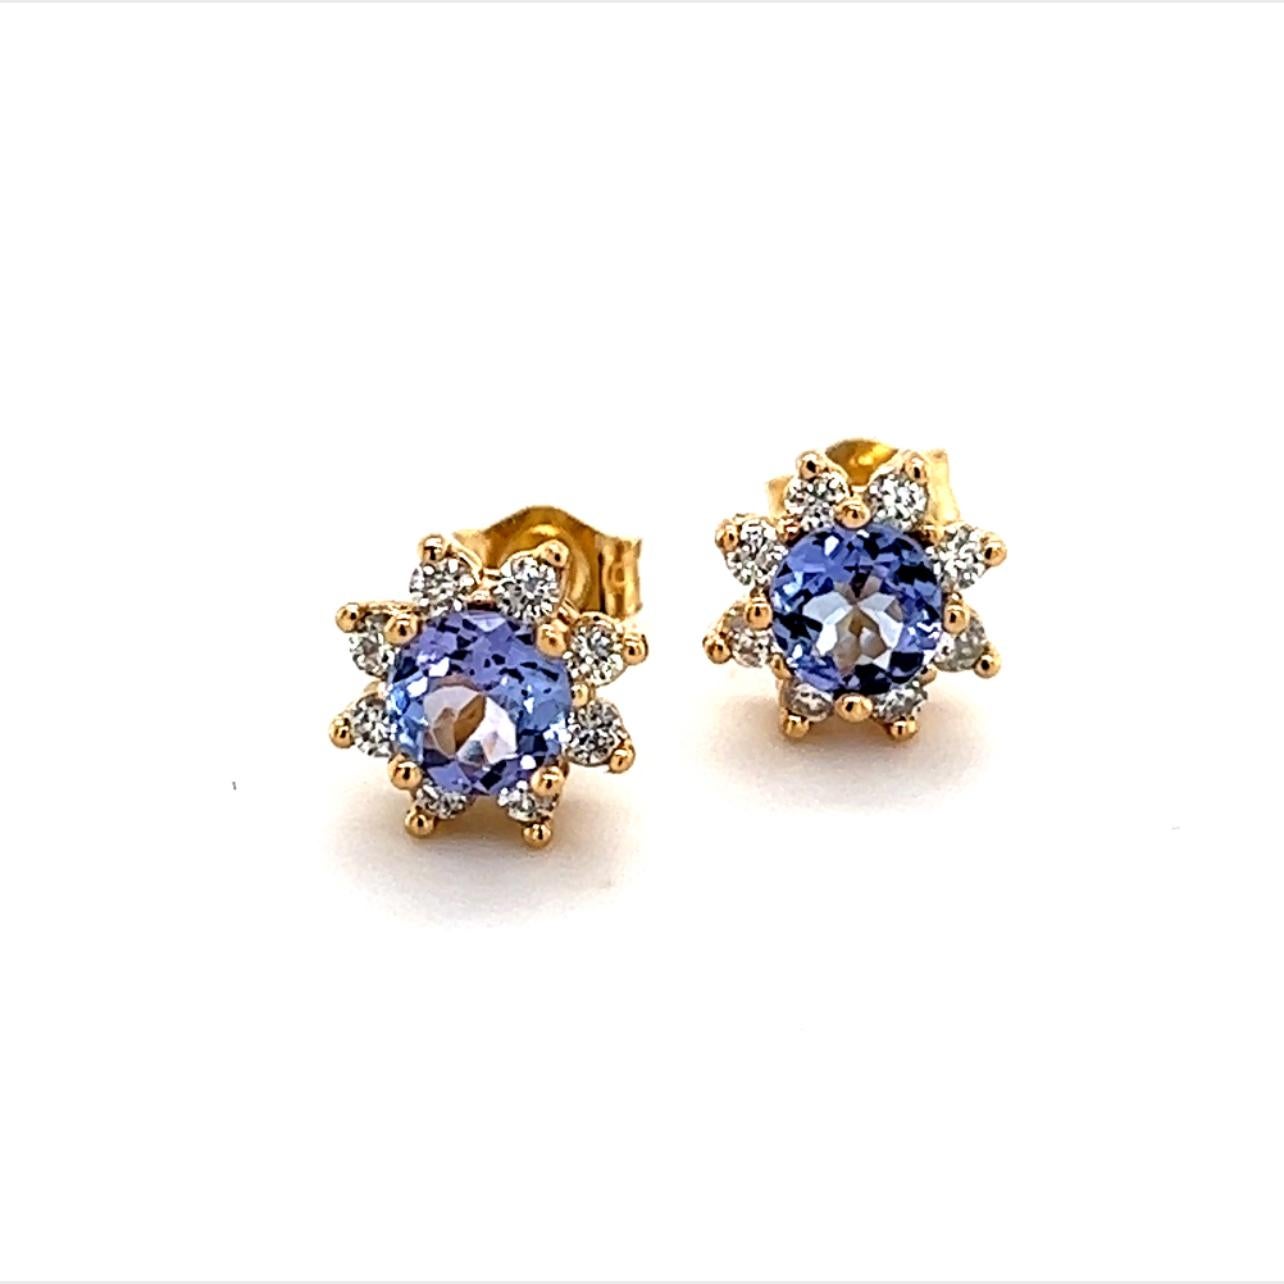 Round Cut Natural Sapphire Diamond Earrings 14k Gold 1.0 TCW Certified For Sale